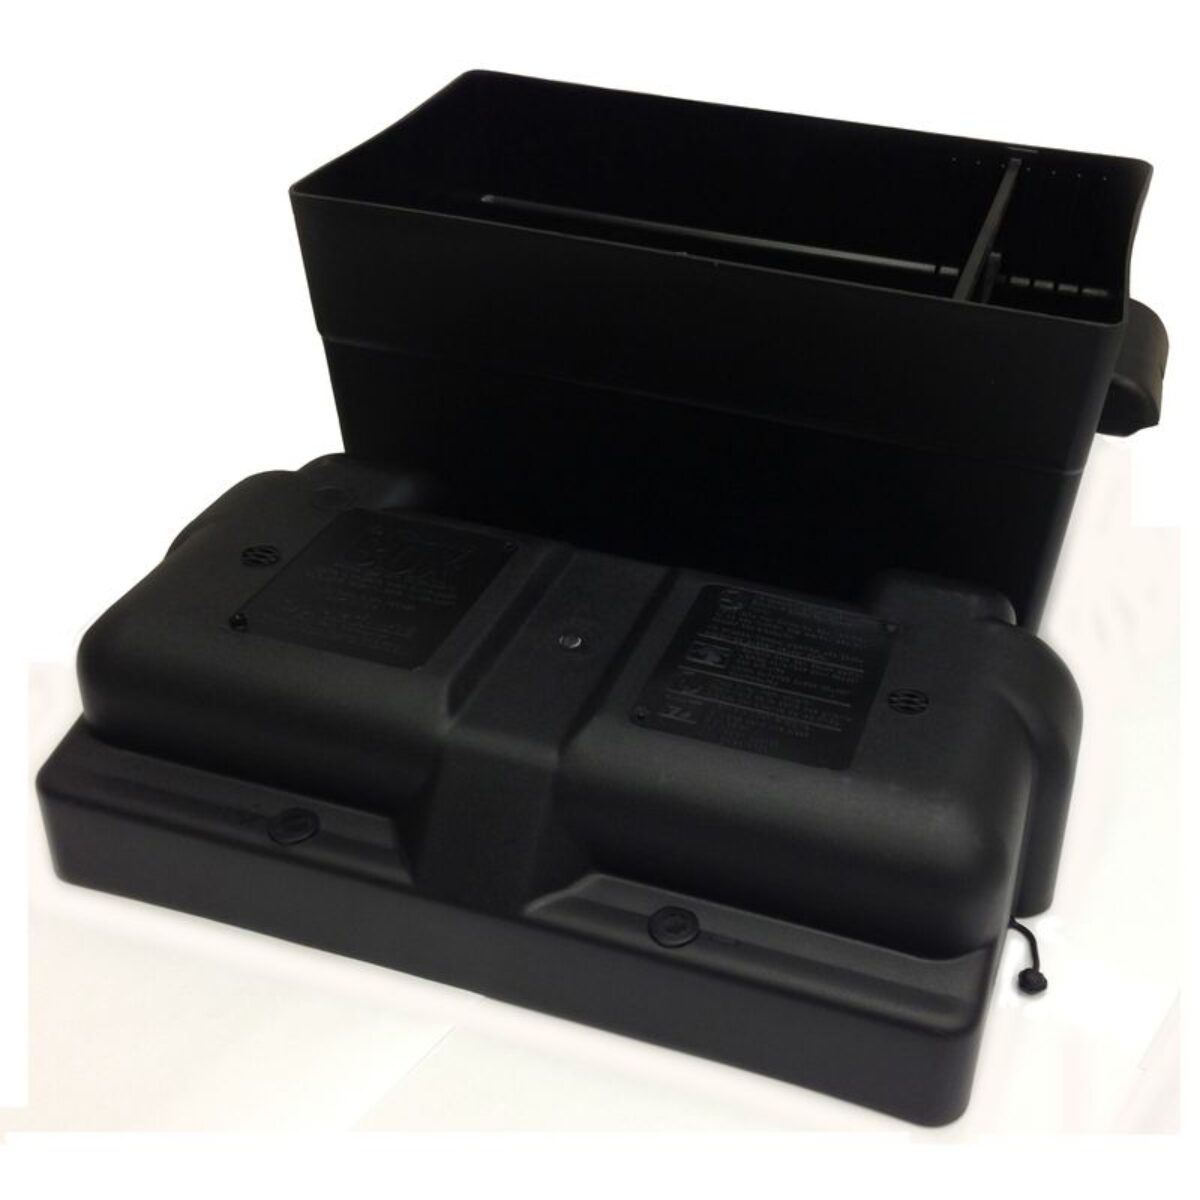 Battery box made out of plastic Standard